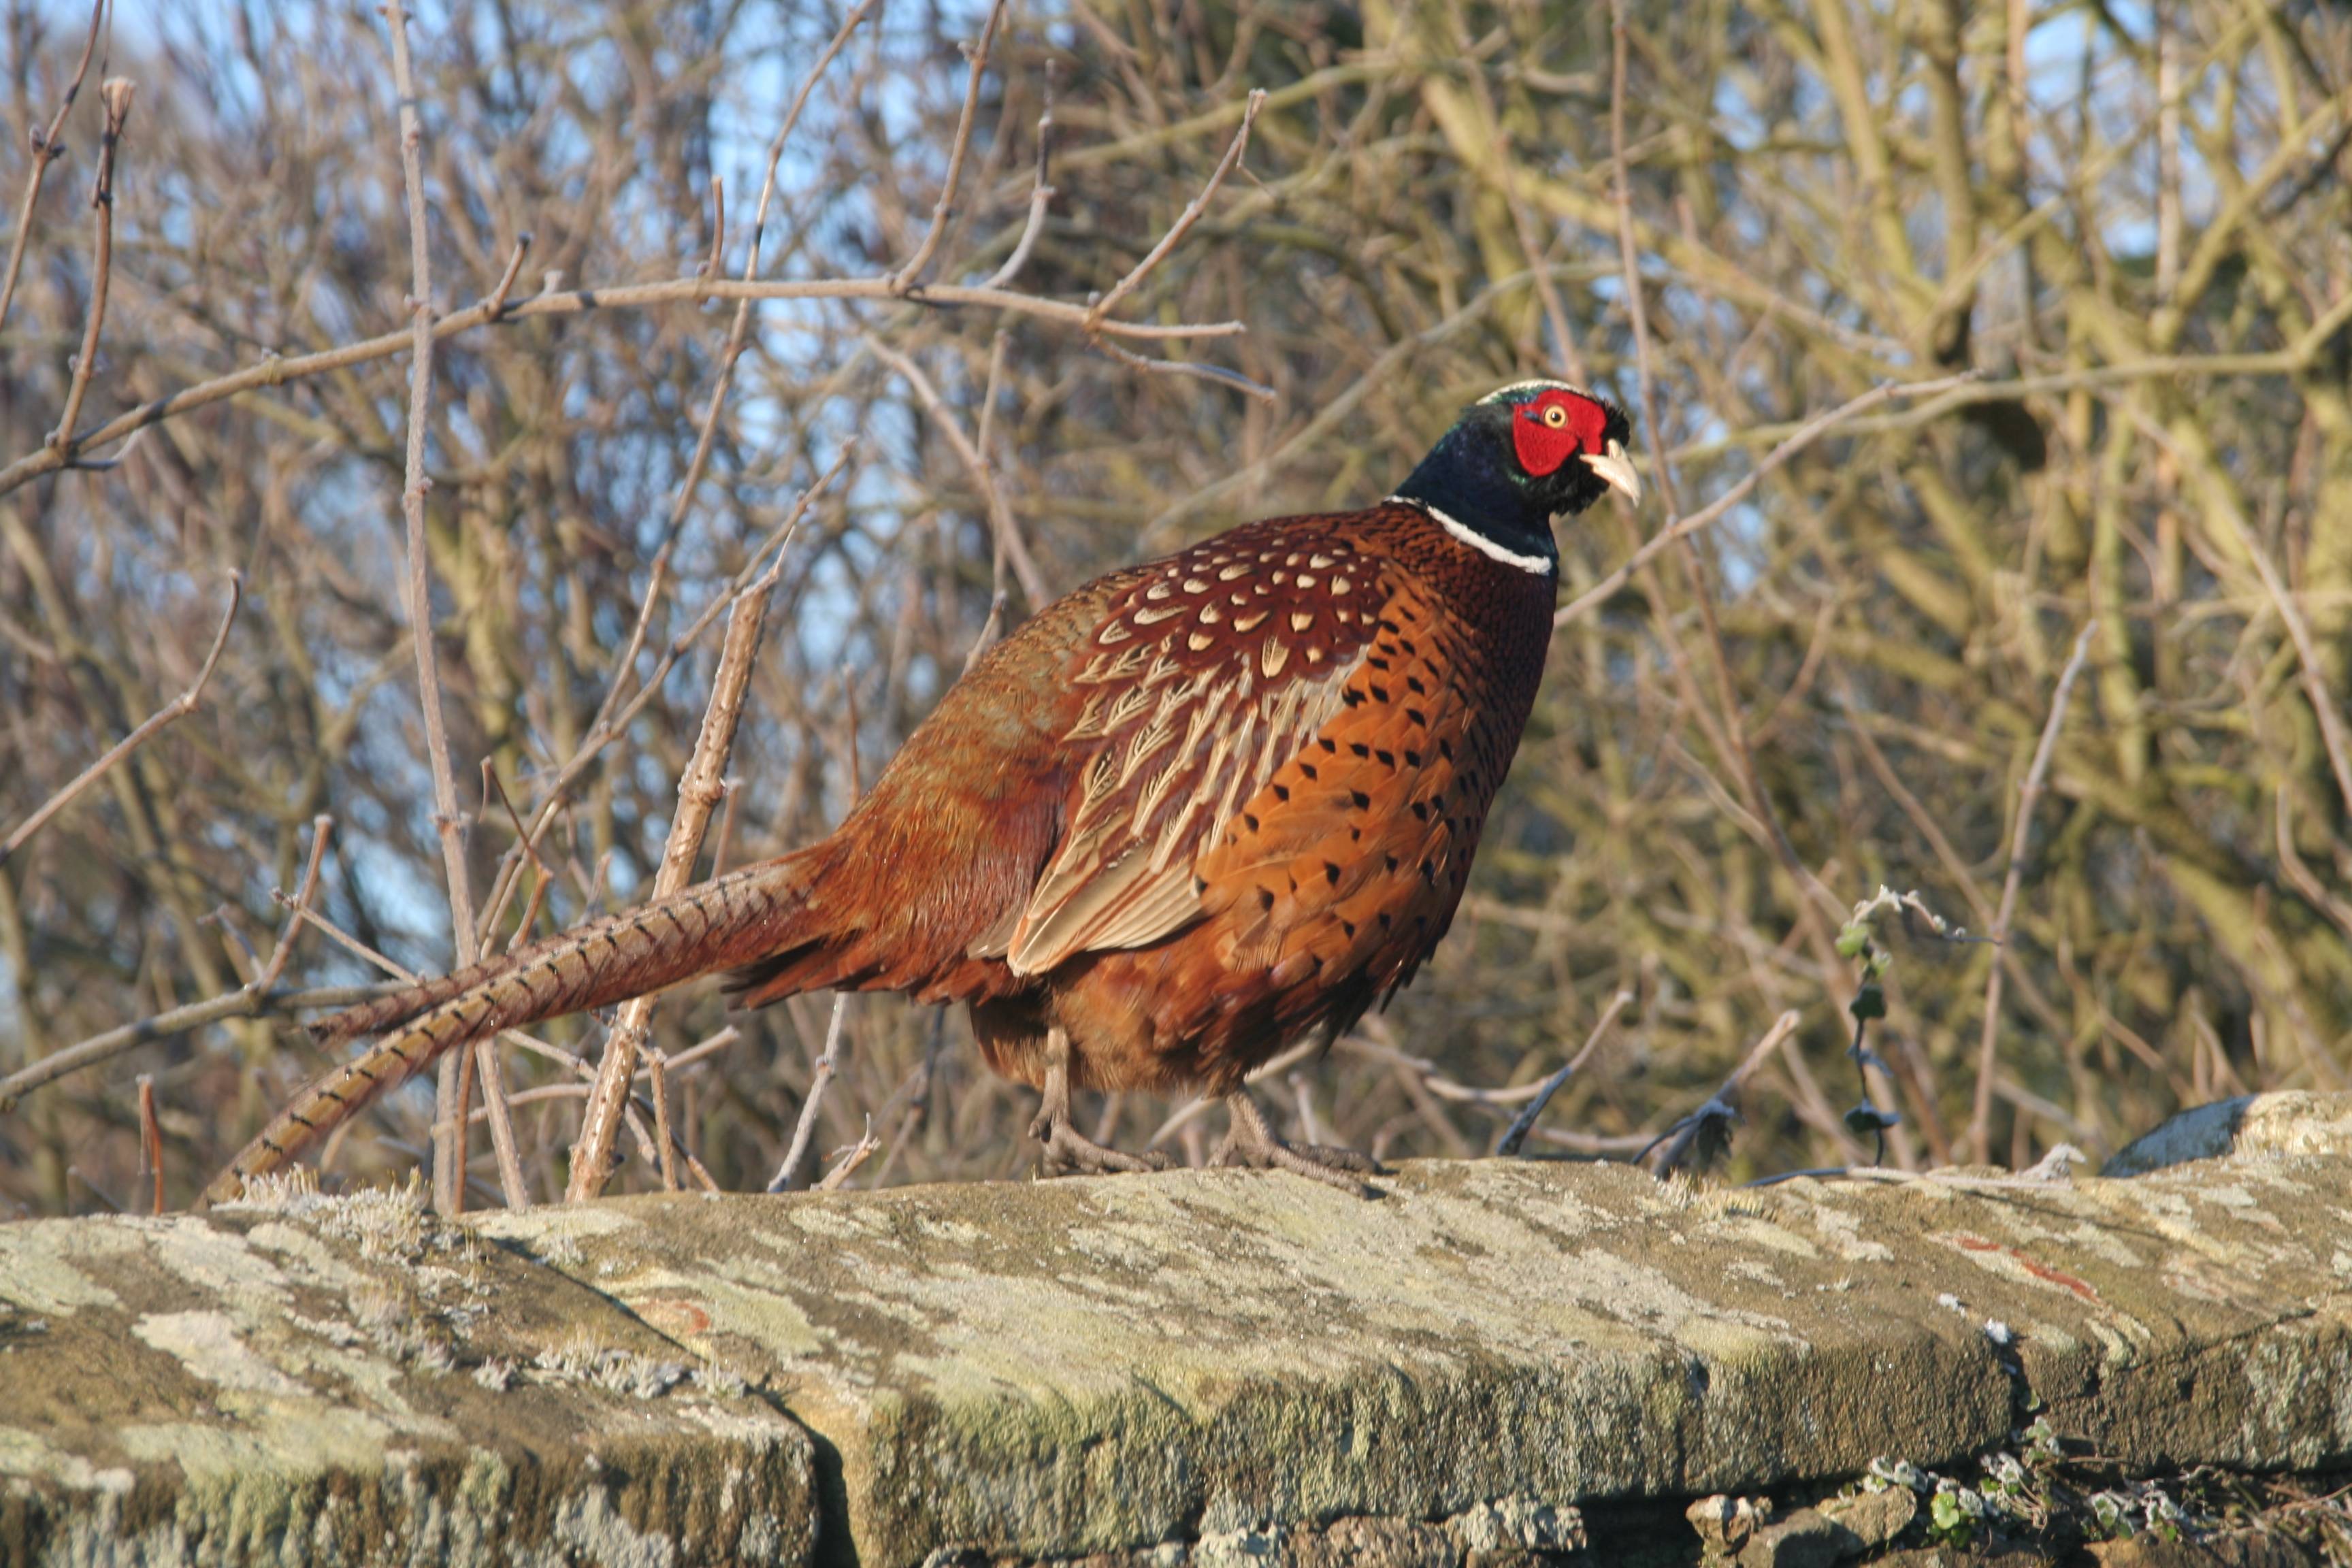 Pheasant warming up on a wall